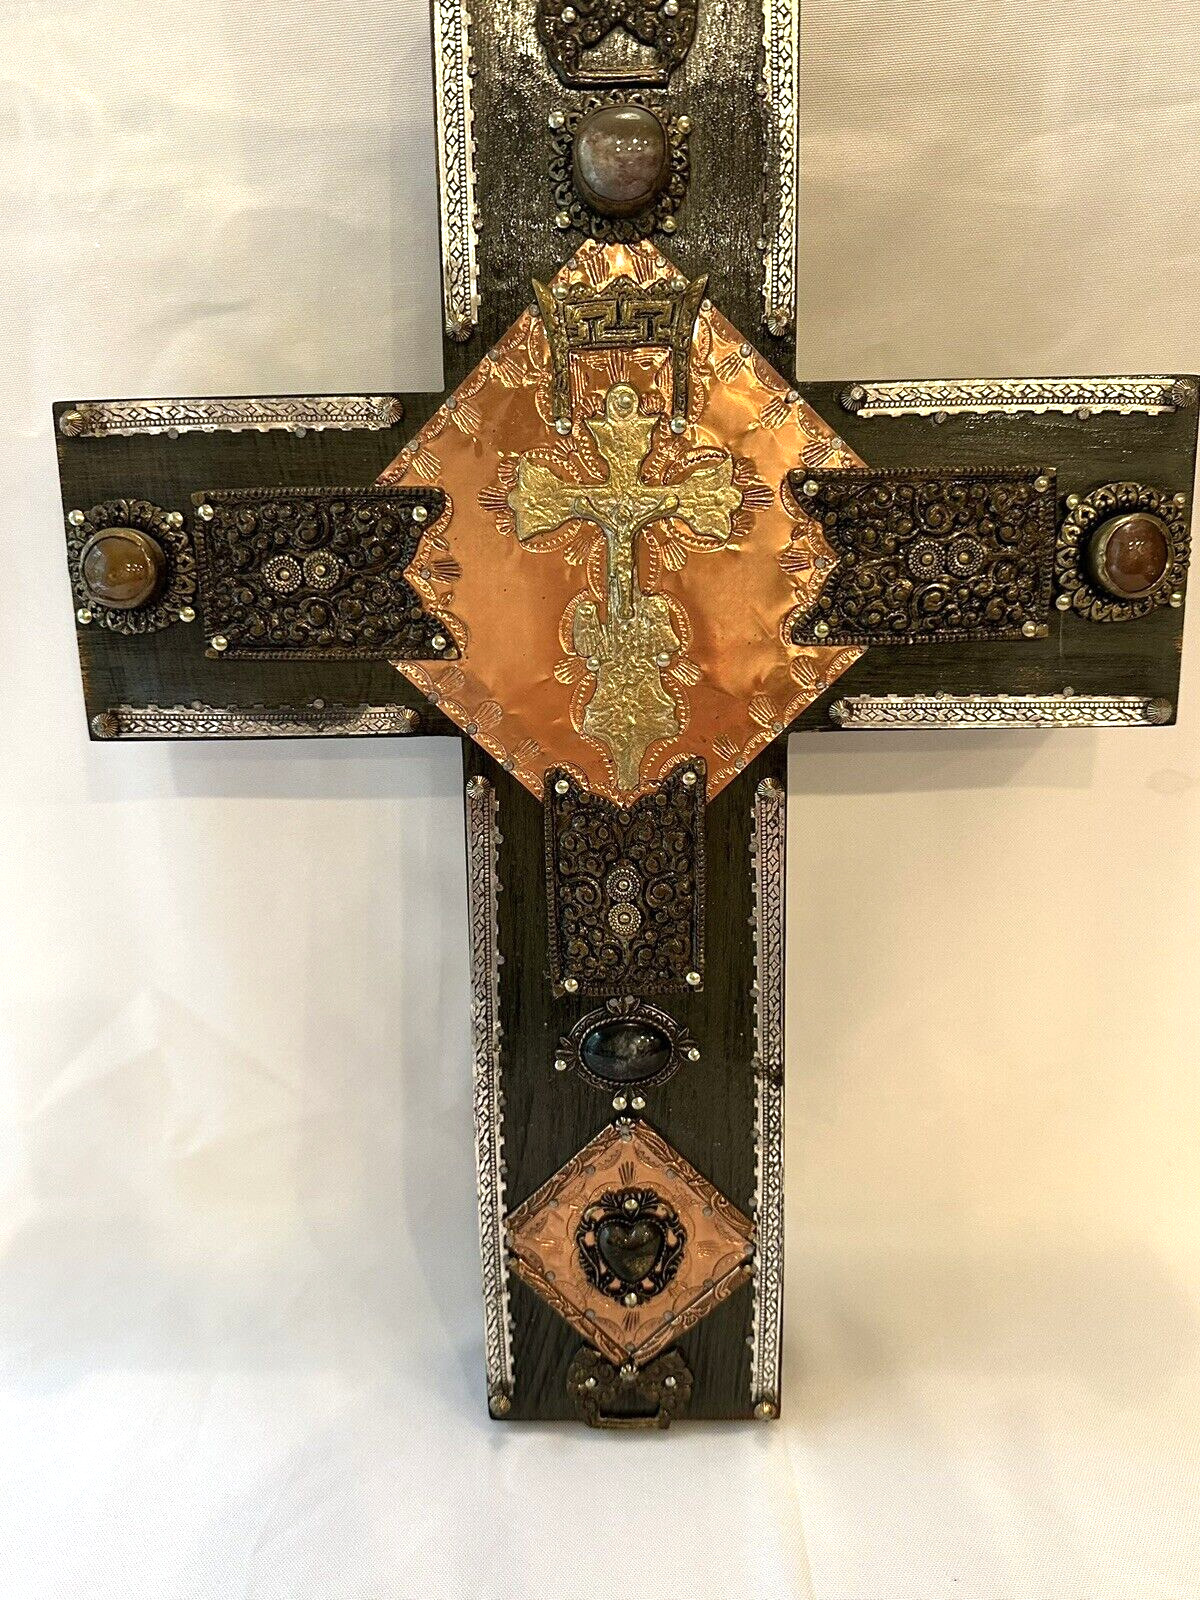 VTG Handmade Lg Wood Cross Crucifix Mexico Agate Stones Mixed Metals Signed